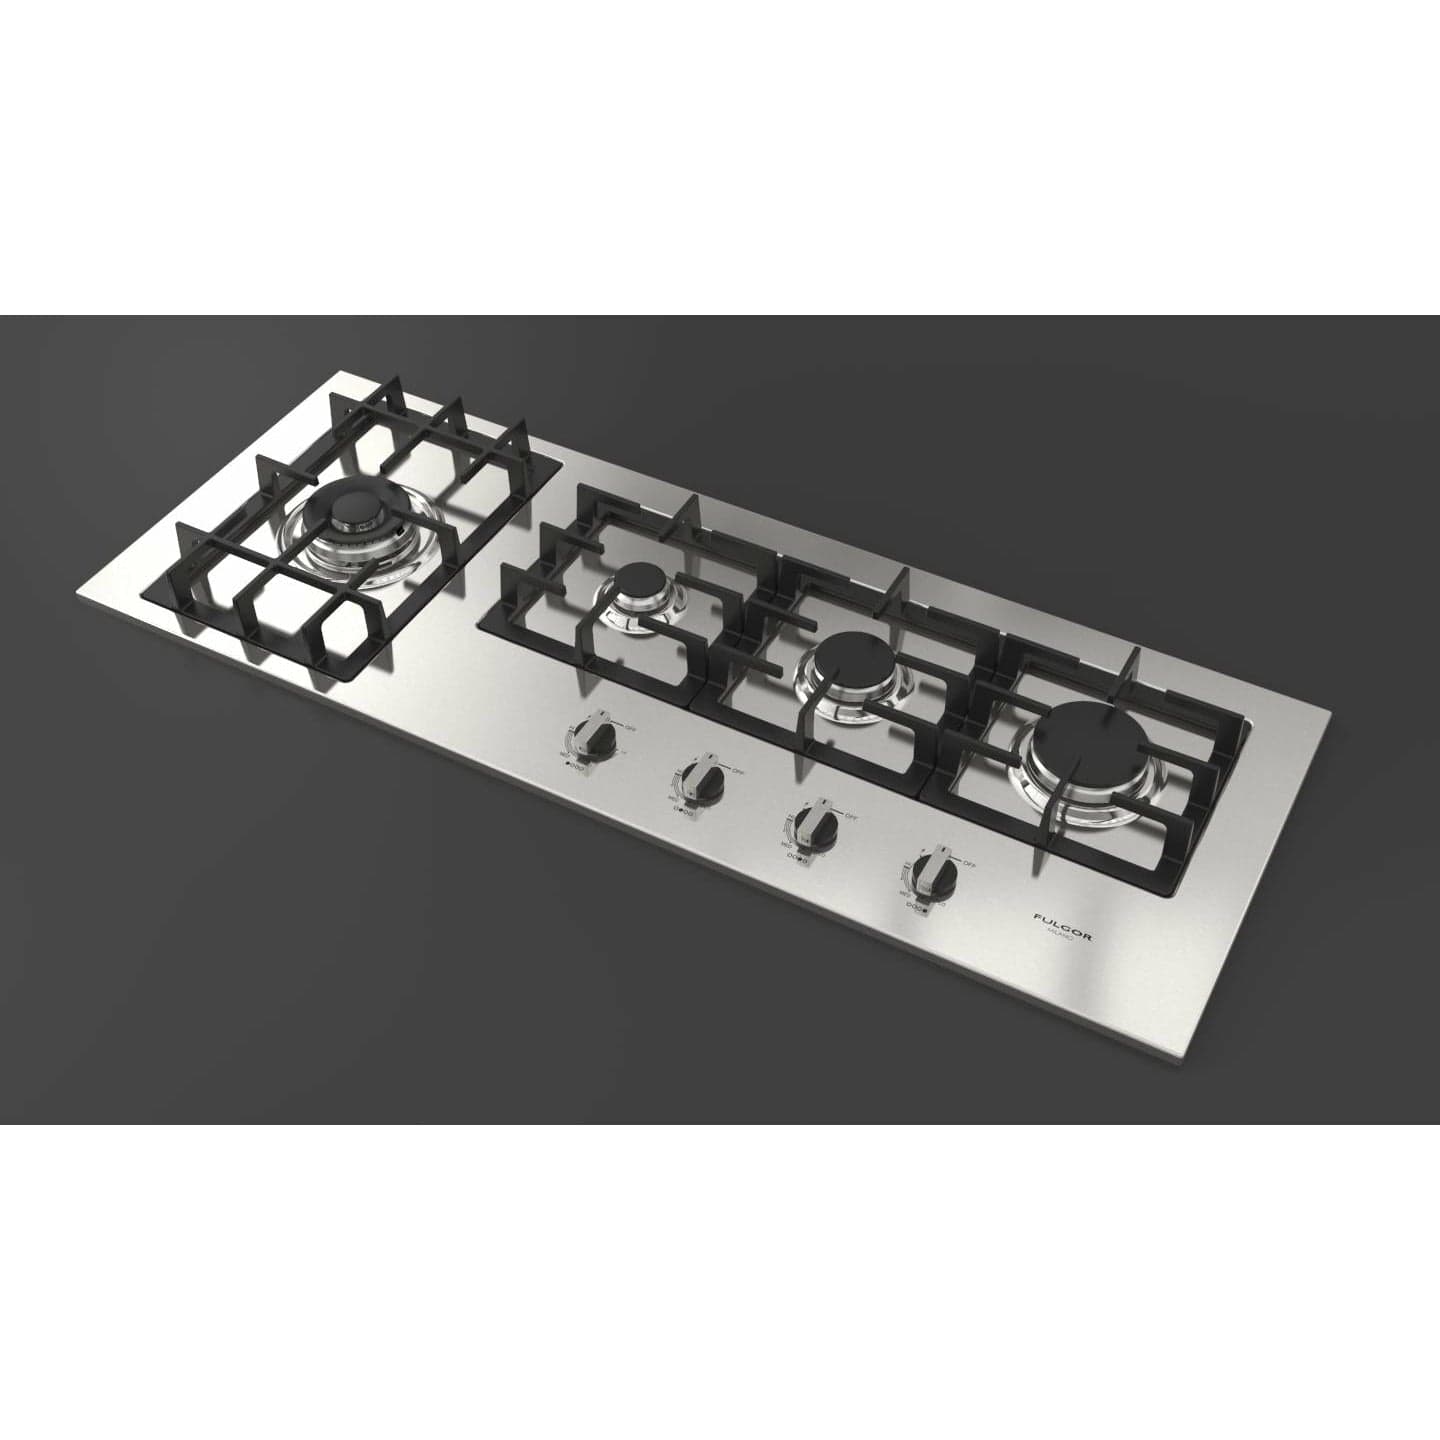 Fulgor Milano 44" Gas Cooktop with 4 European Sealed Burners - F4GK42S1 Cooktops F4GK42S1 Luxury Appliances Direct